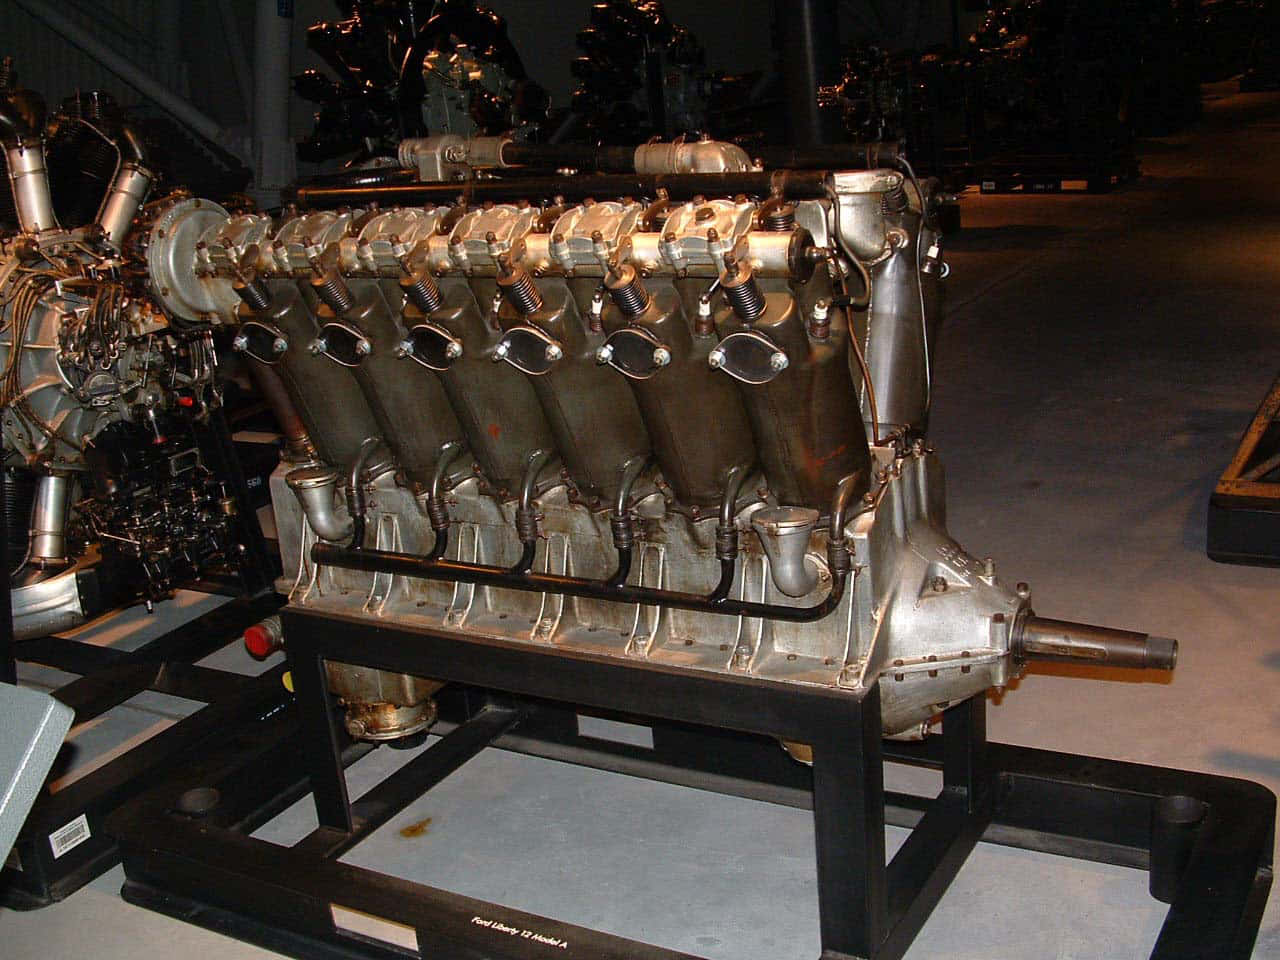 A intricate looking engine, powering a modern marvel